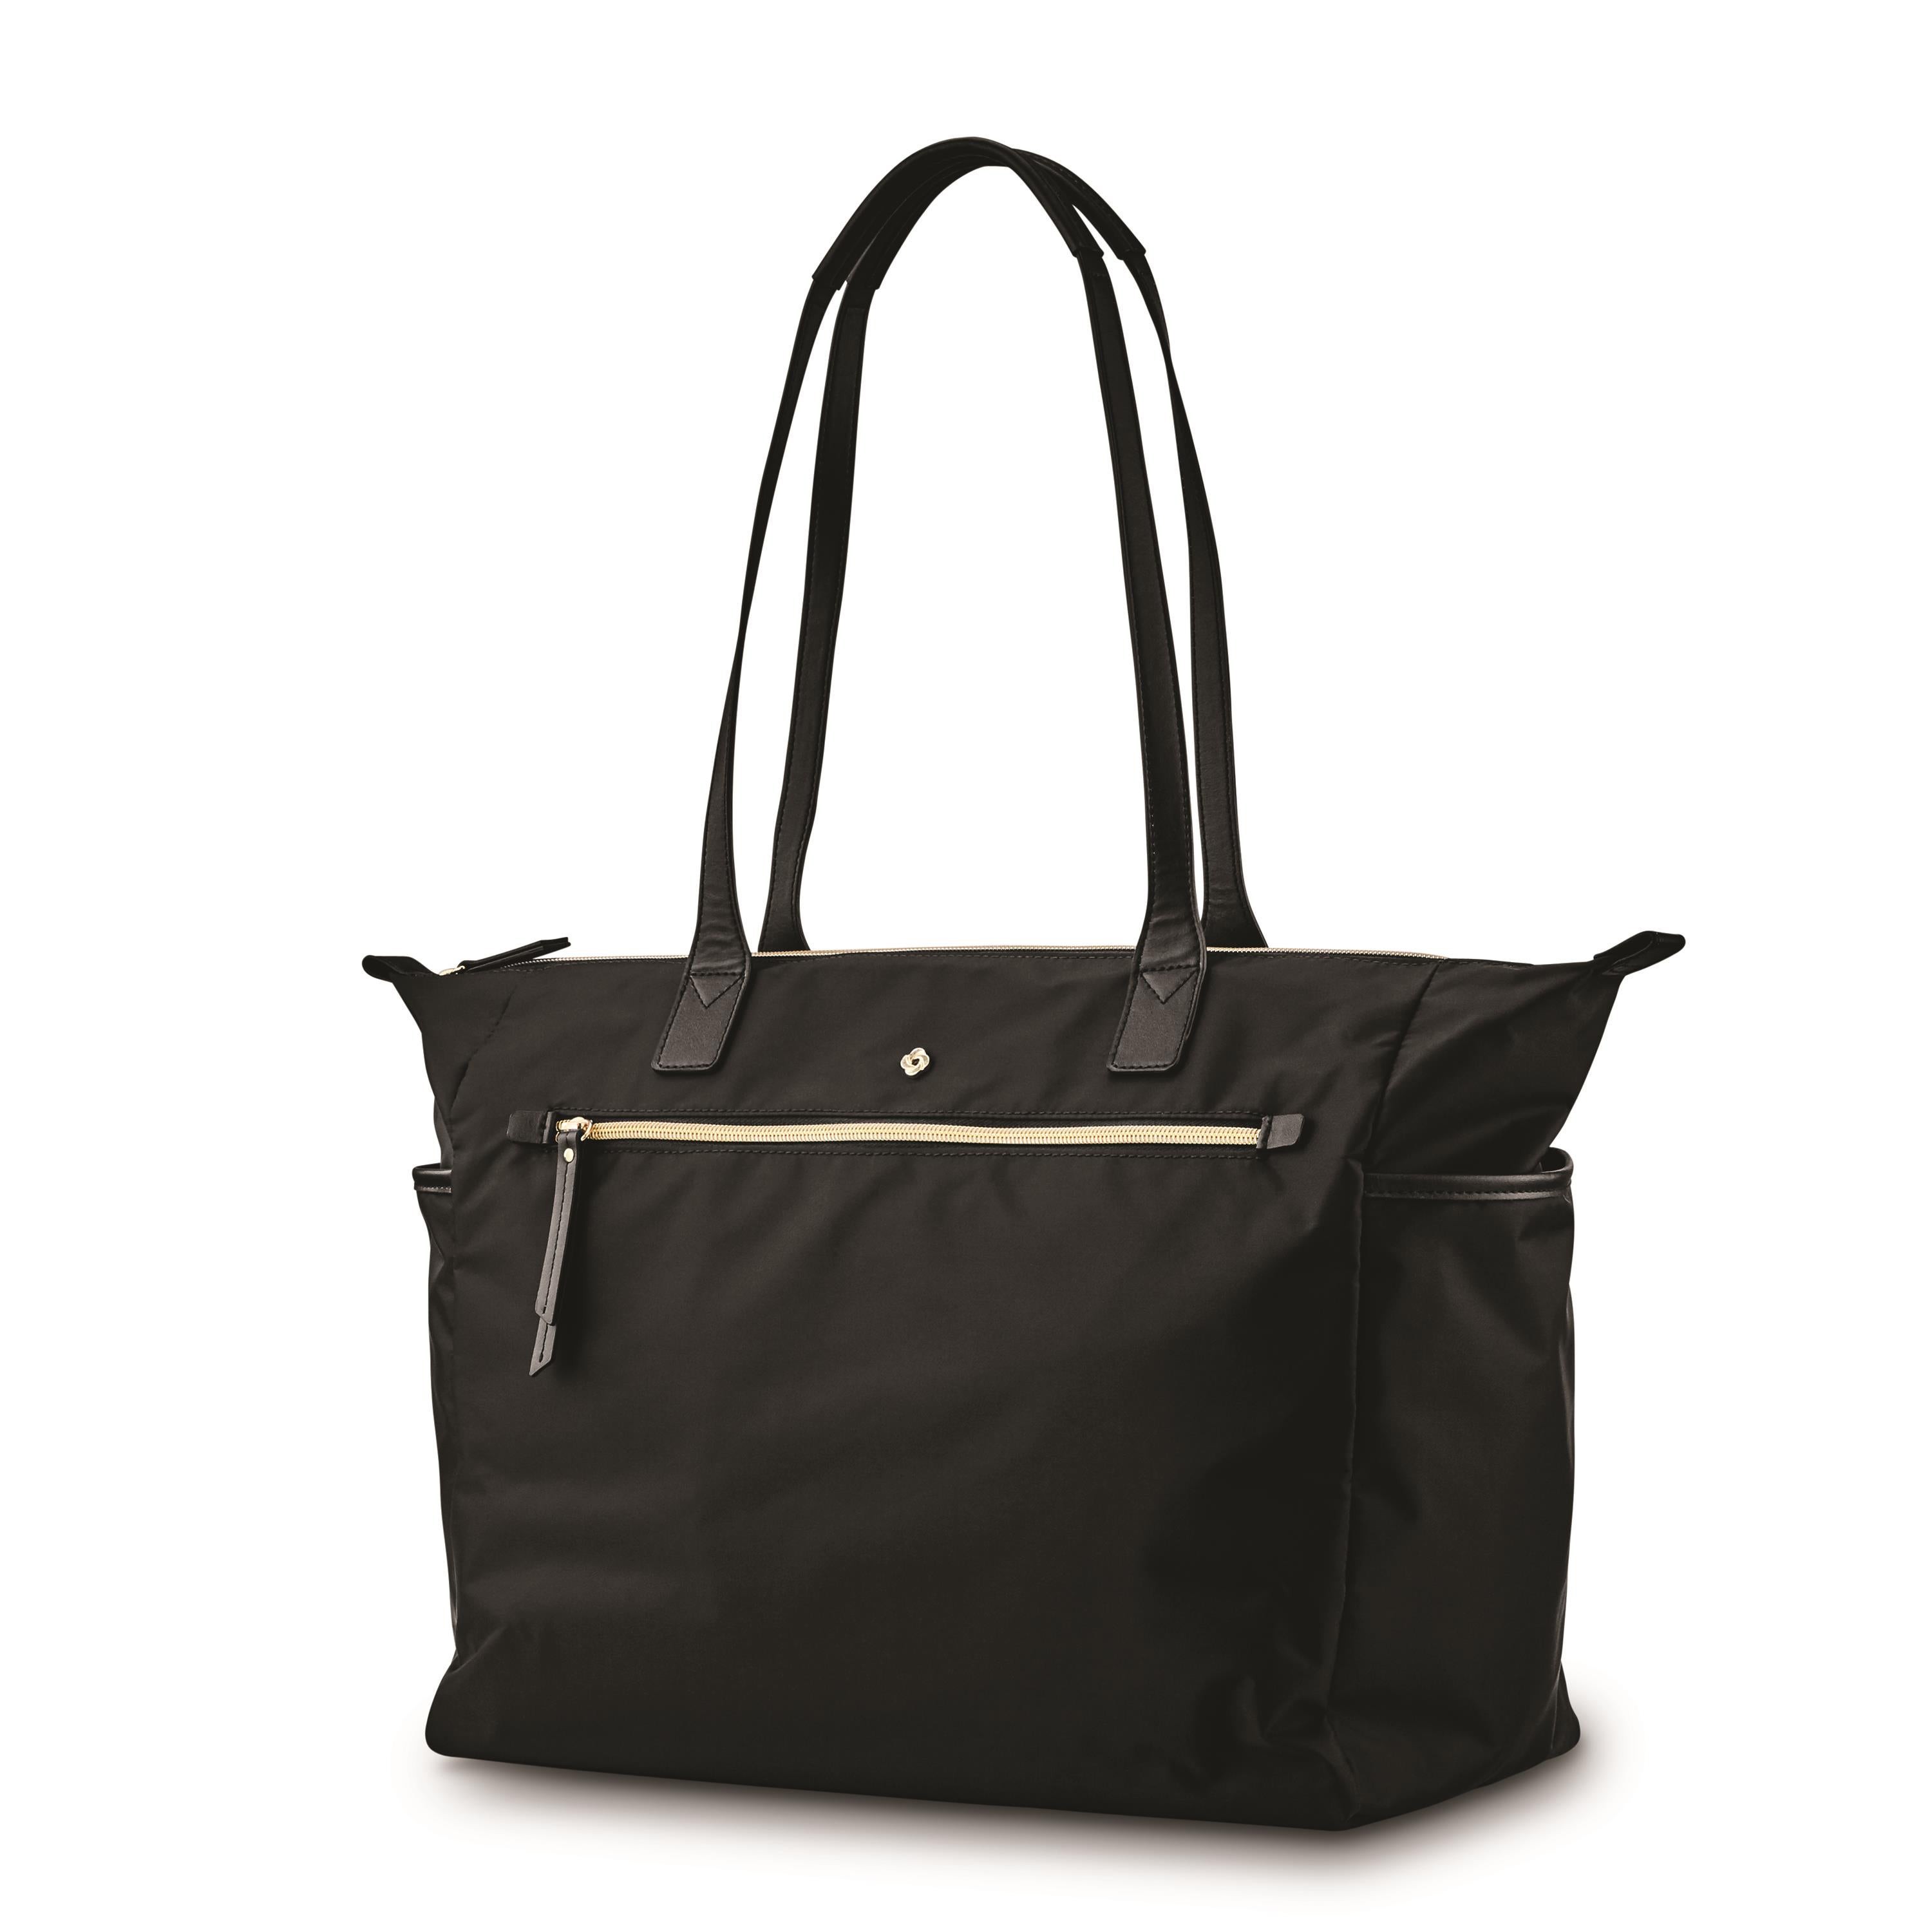 Mobile Solutions Deluxe Carryall Black